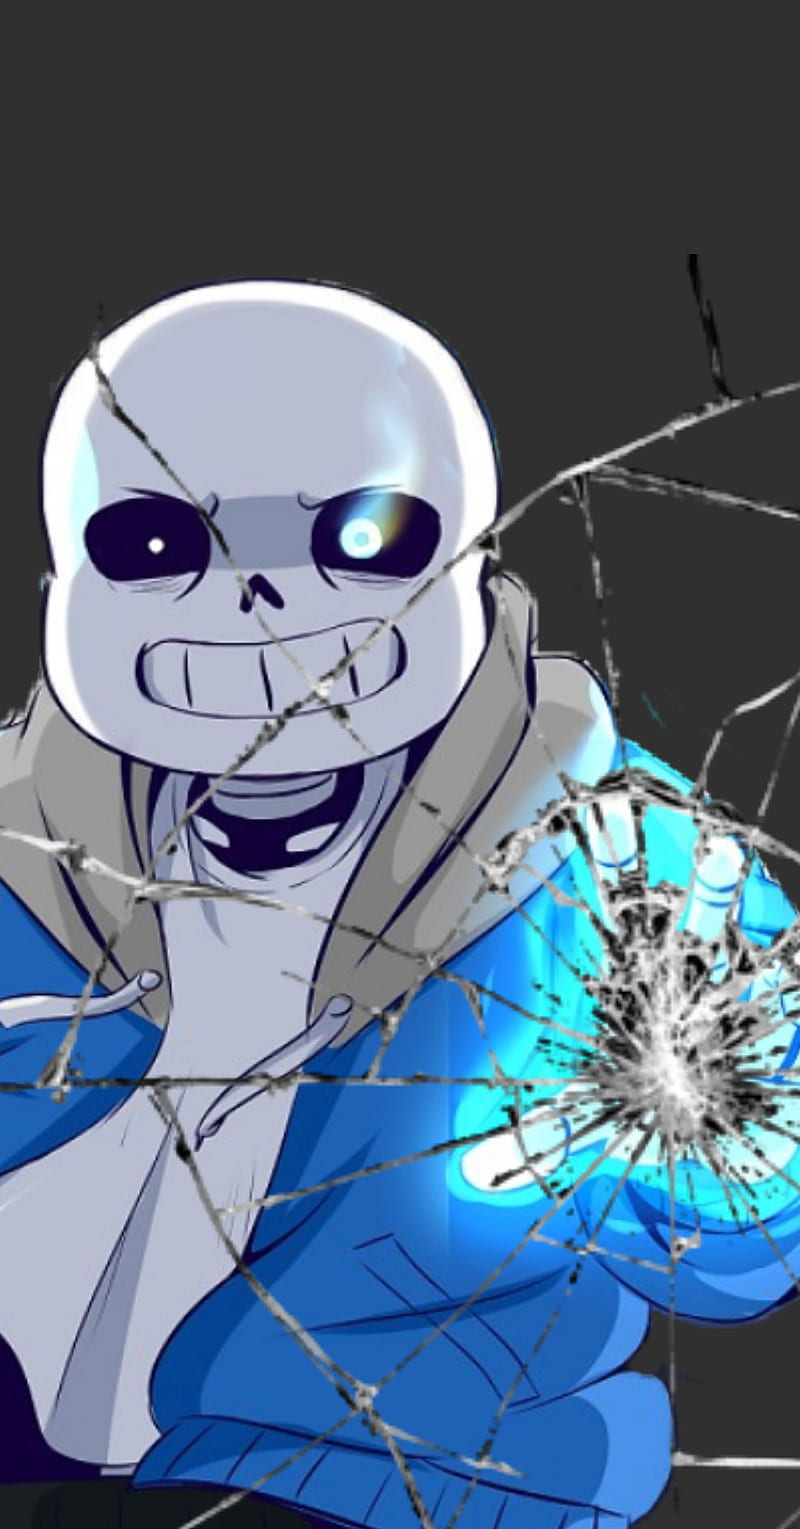 madness containment cell on Twitter  Anime undertale, Dream sans,  Undertale fanart